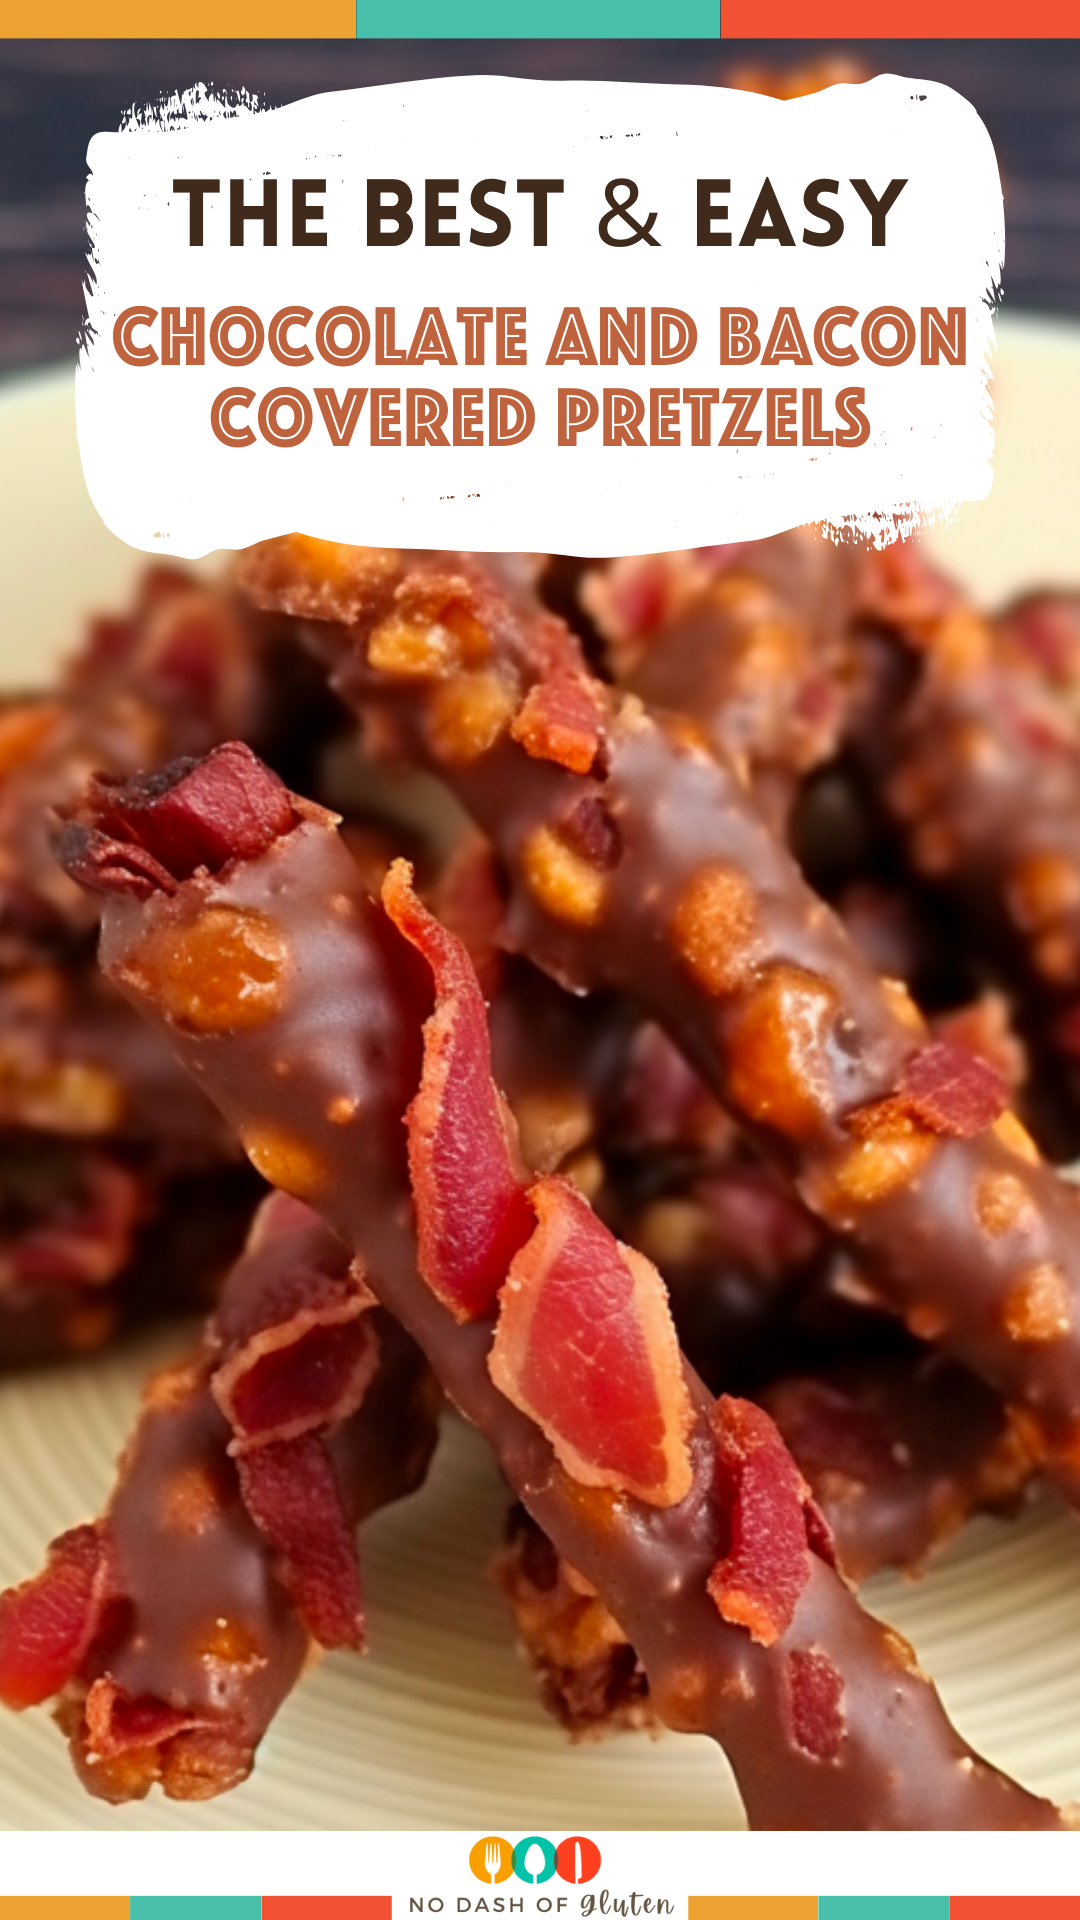 Chocolate and Bacon Covered Pretzels